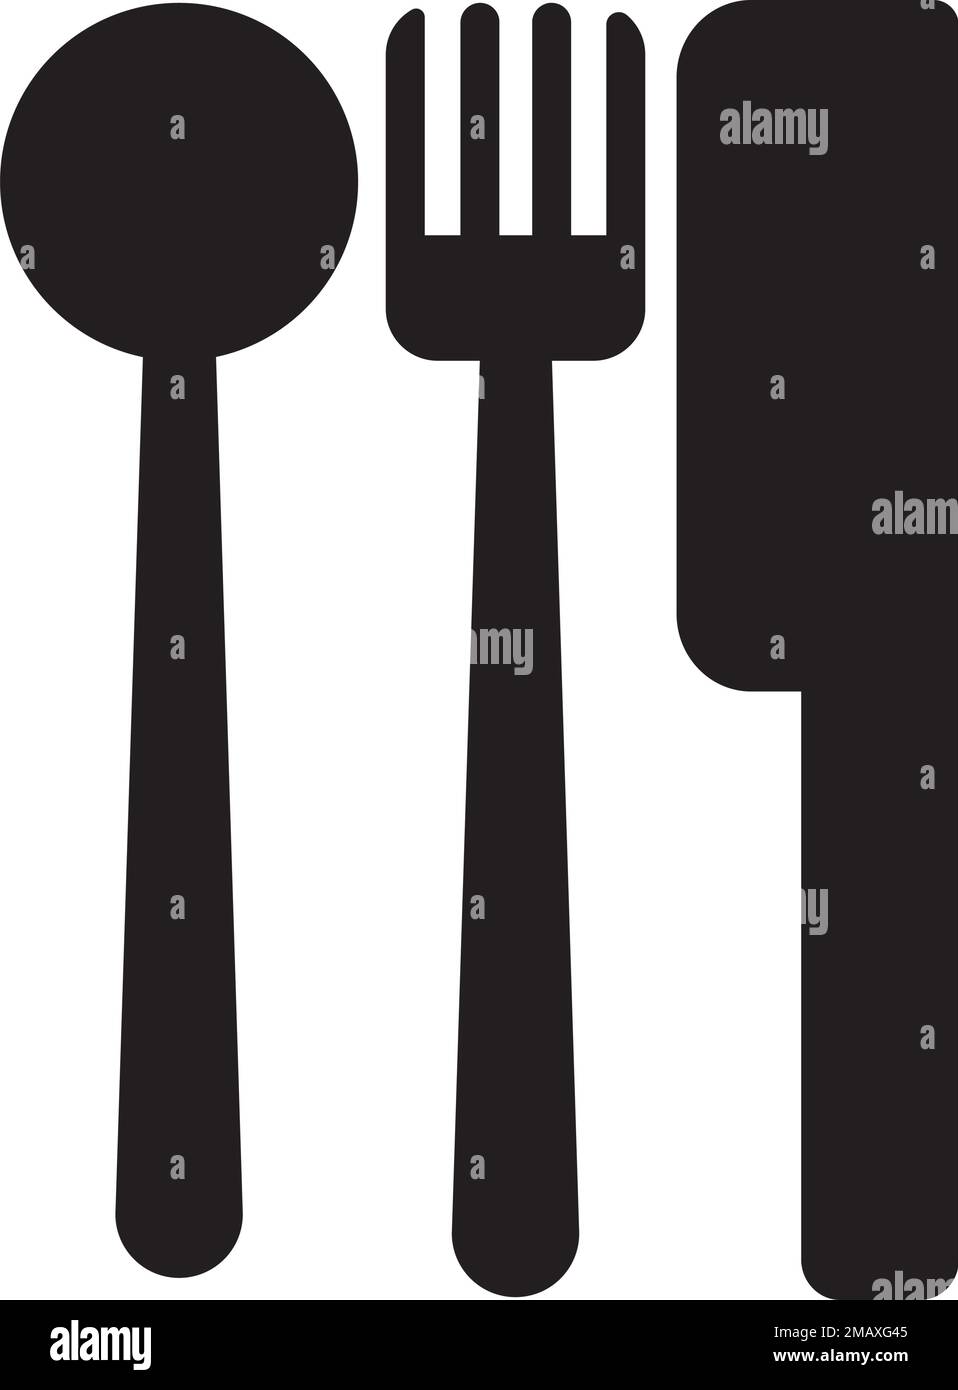 spoon and fork logo vectortemplate Stock Vector